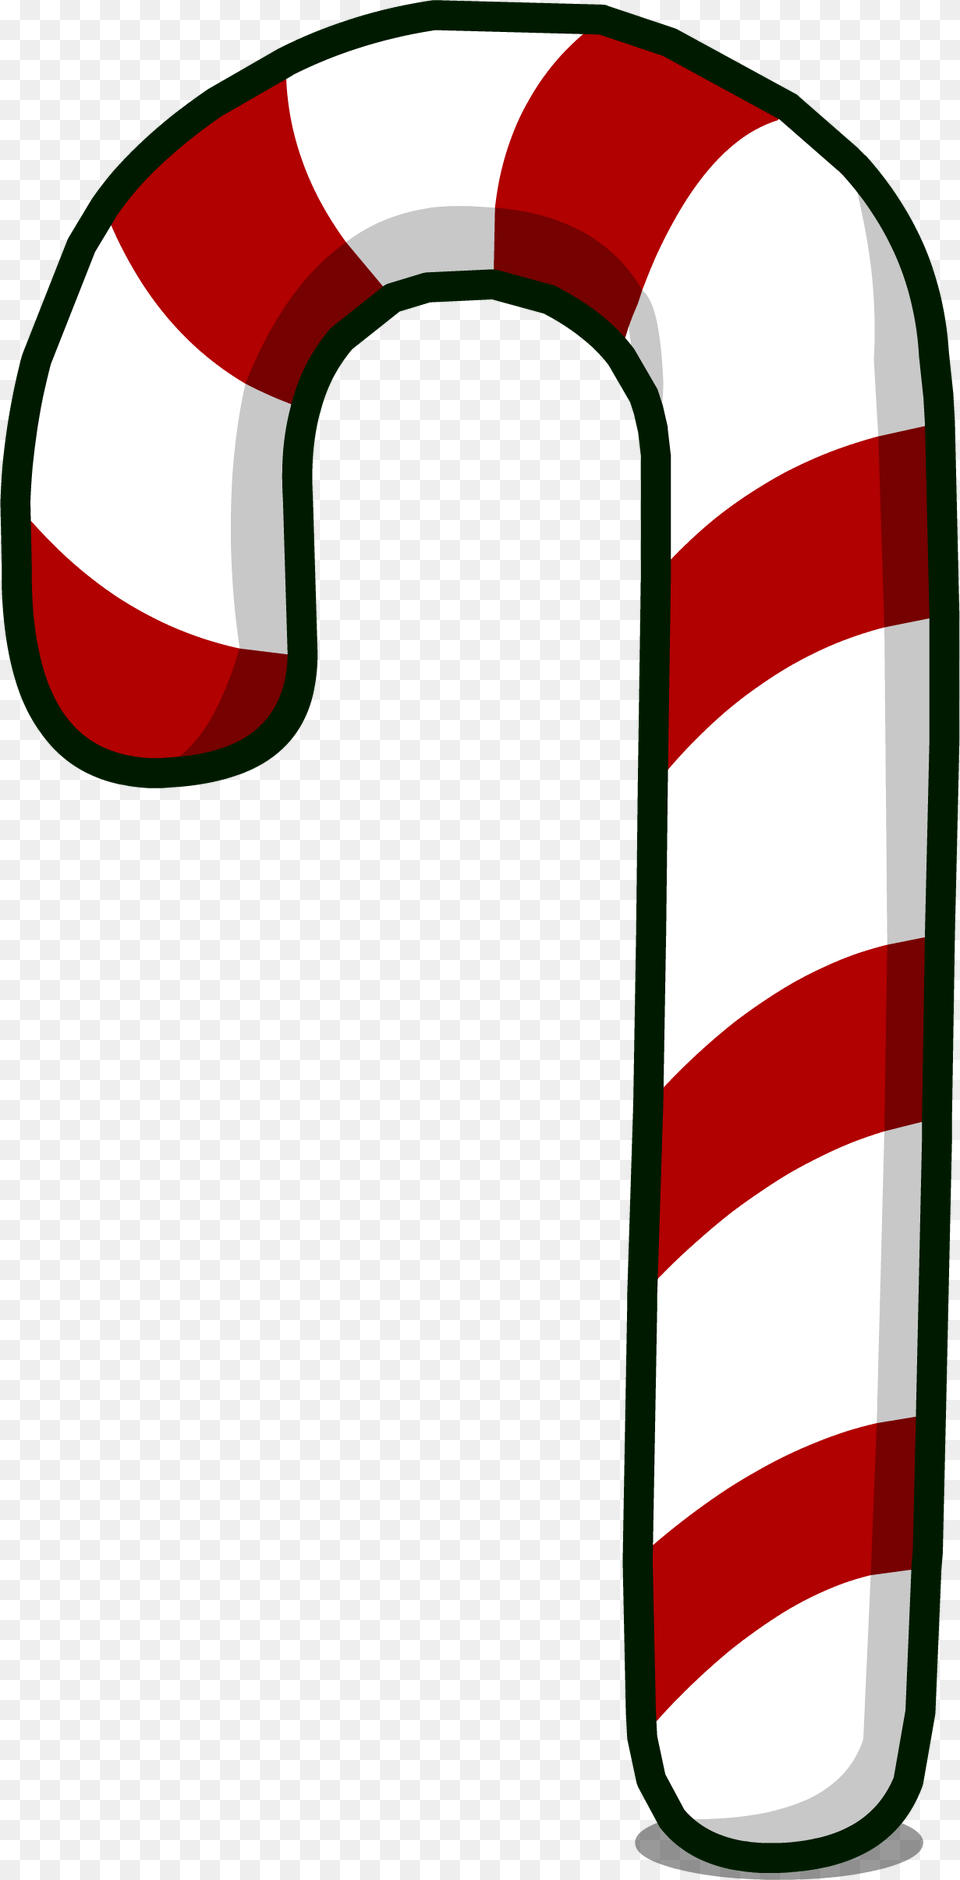 Giant Candy Cane Cartoon Candy Cane, Food, Sweets, Stick, Dynamite Png Image